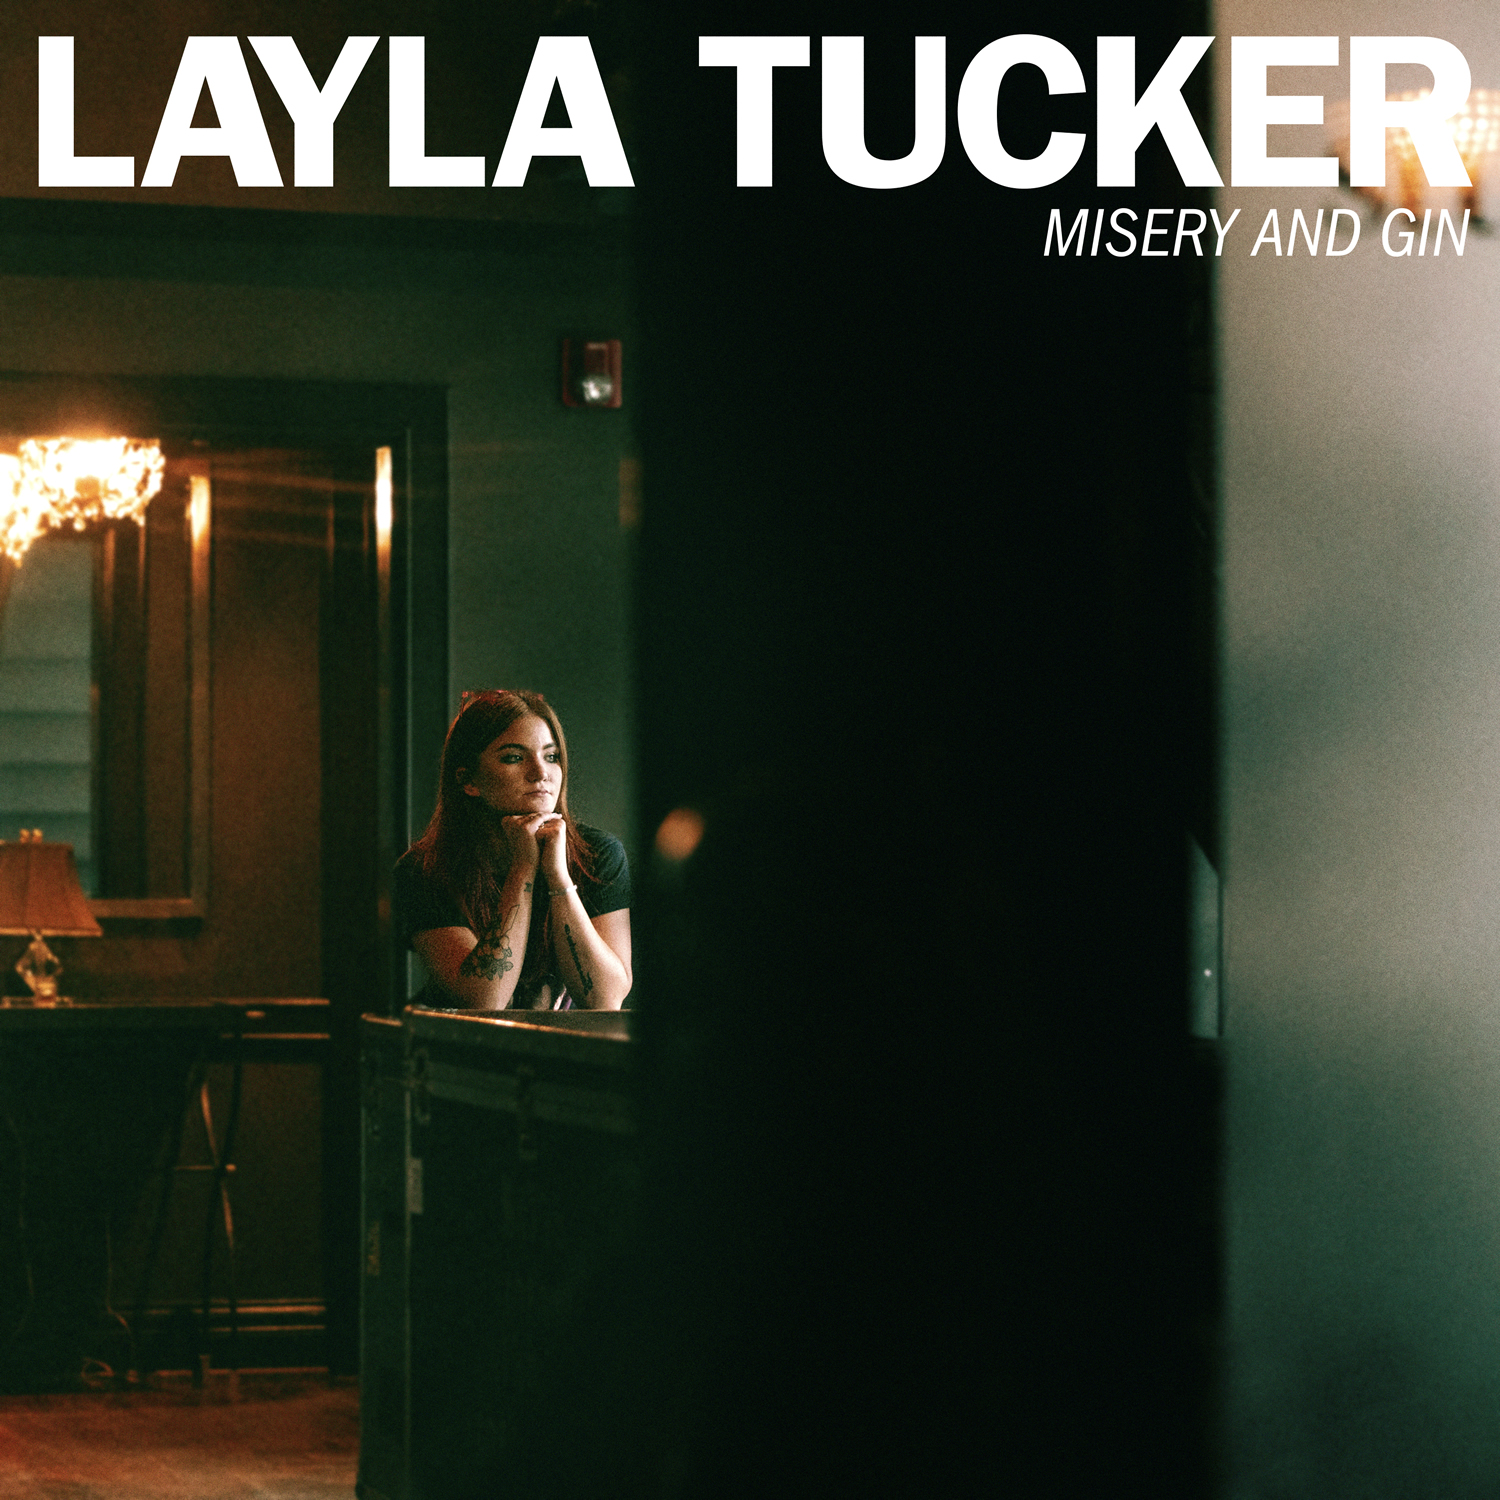 Layla Tucker - Misery and Gin